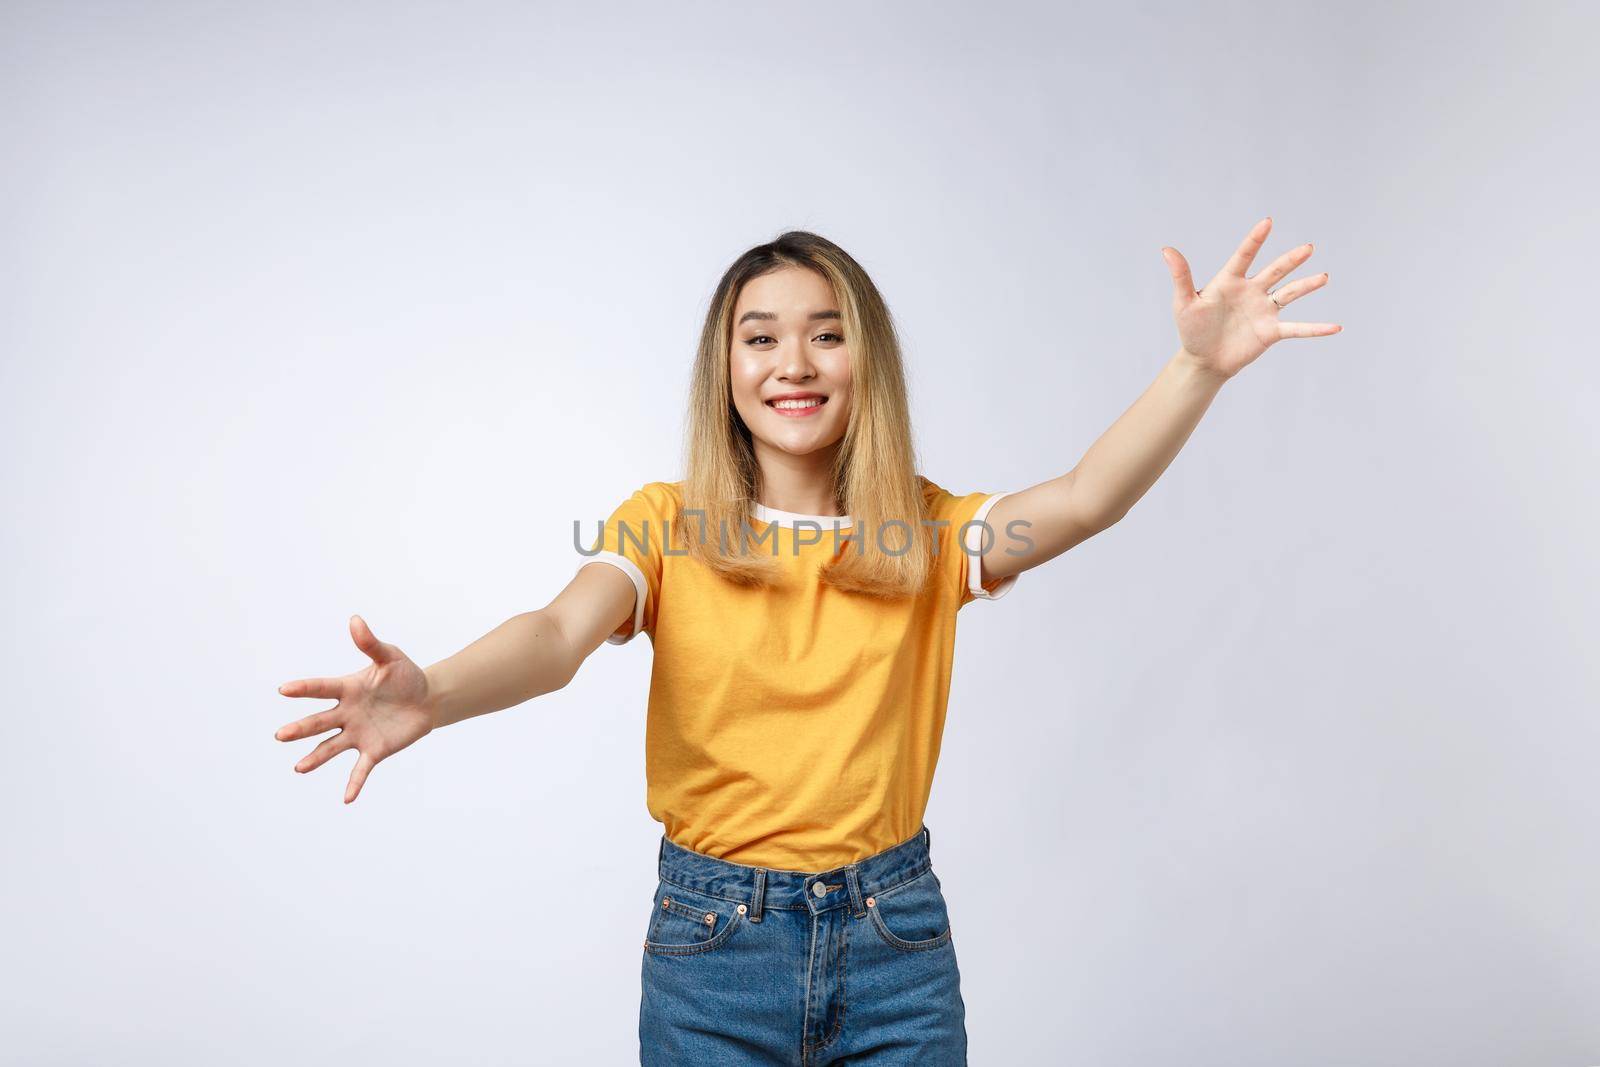 Closeup portrait of pretty young woman motioning with arms to come and give her a bear hug, isolated on white background. Positive emotion facial expression feeling, signs symbols, body language